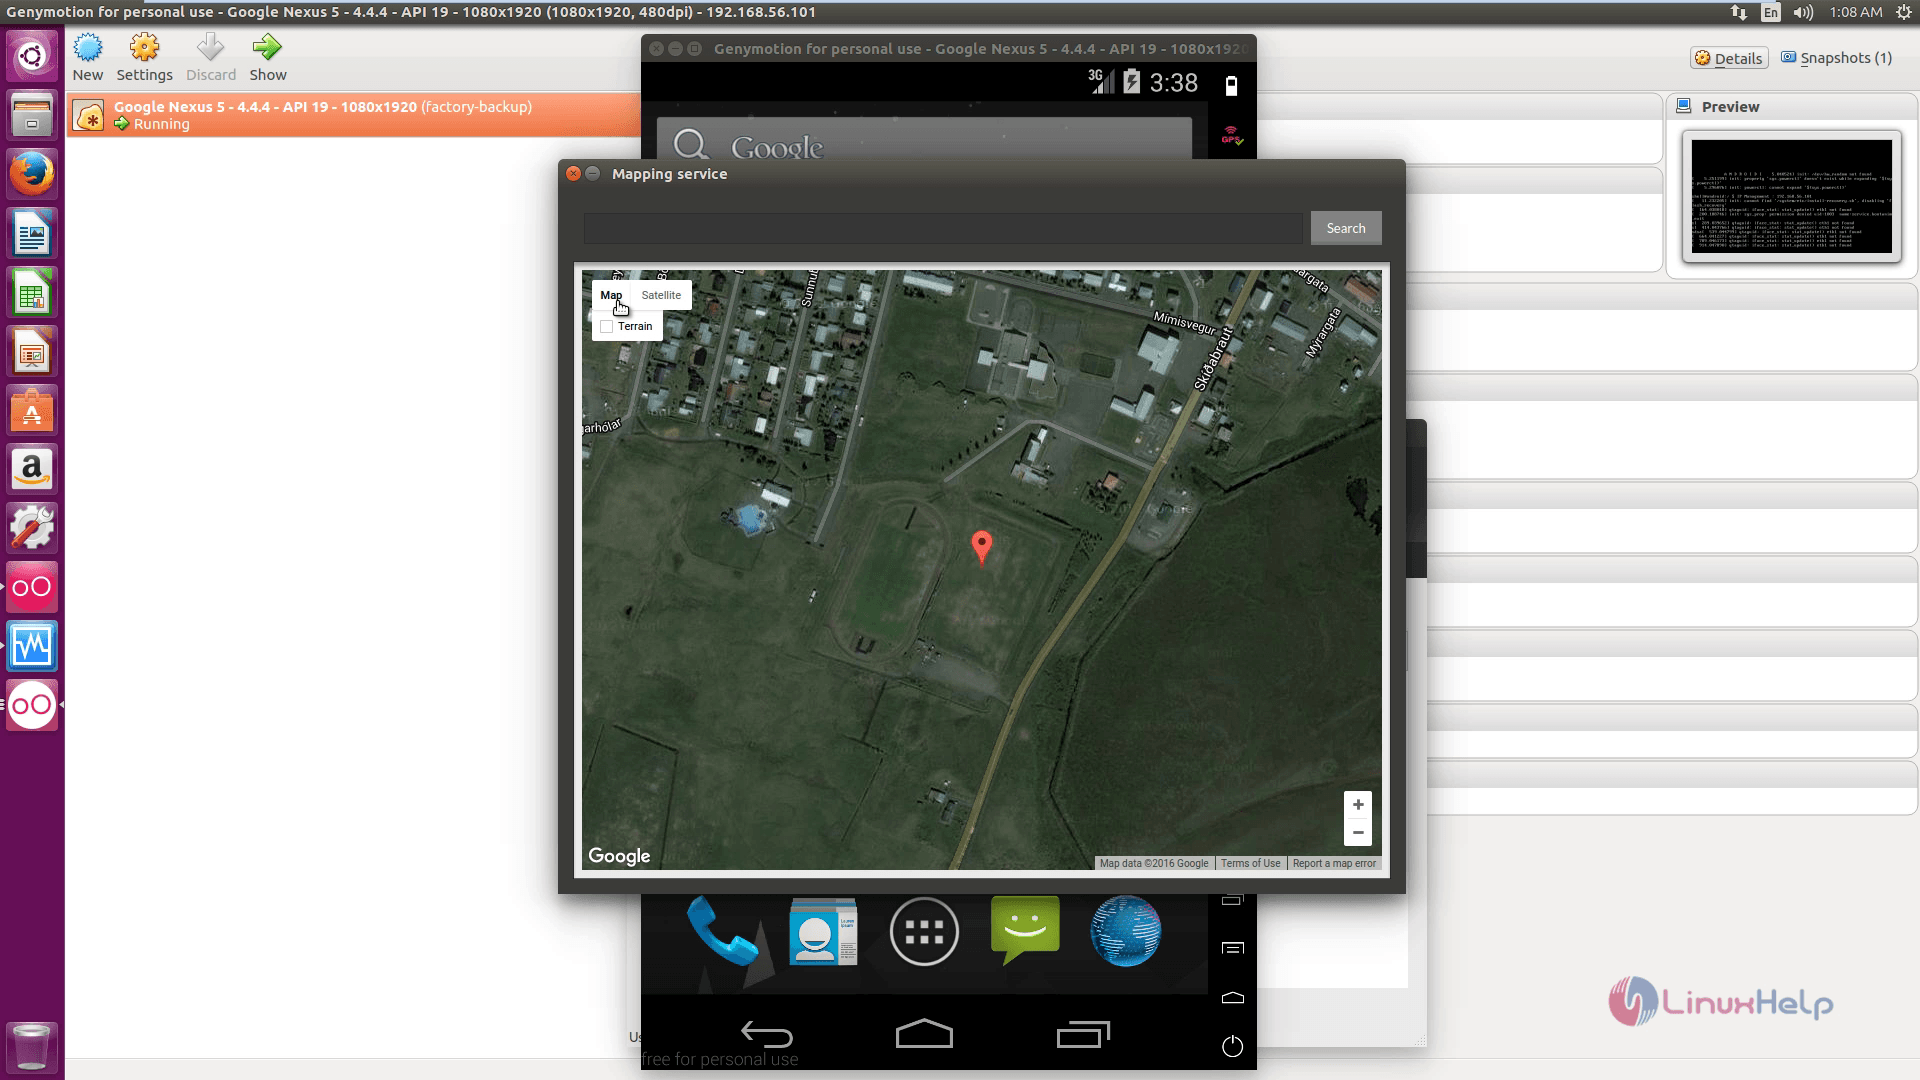 run-Android-Apps-Ubuntu-Genymotion-Emulator-testing-and-presentation-Switch-between-map-and-satellite